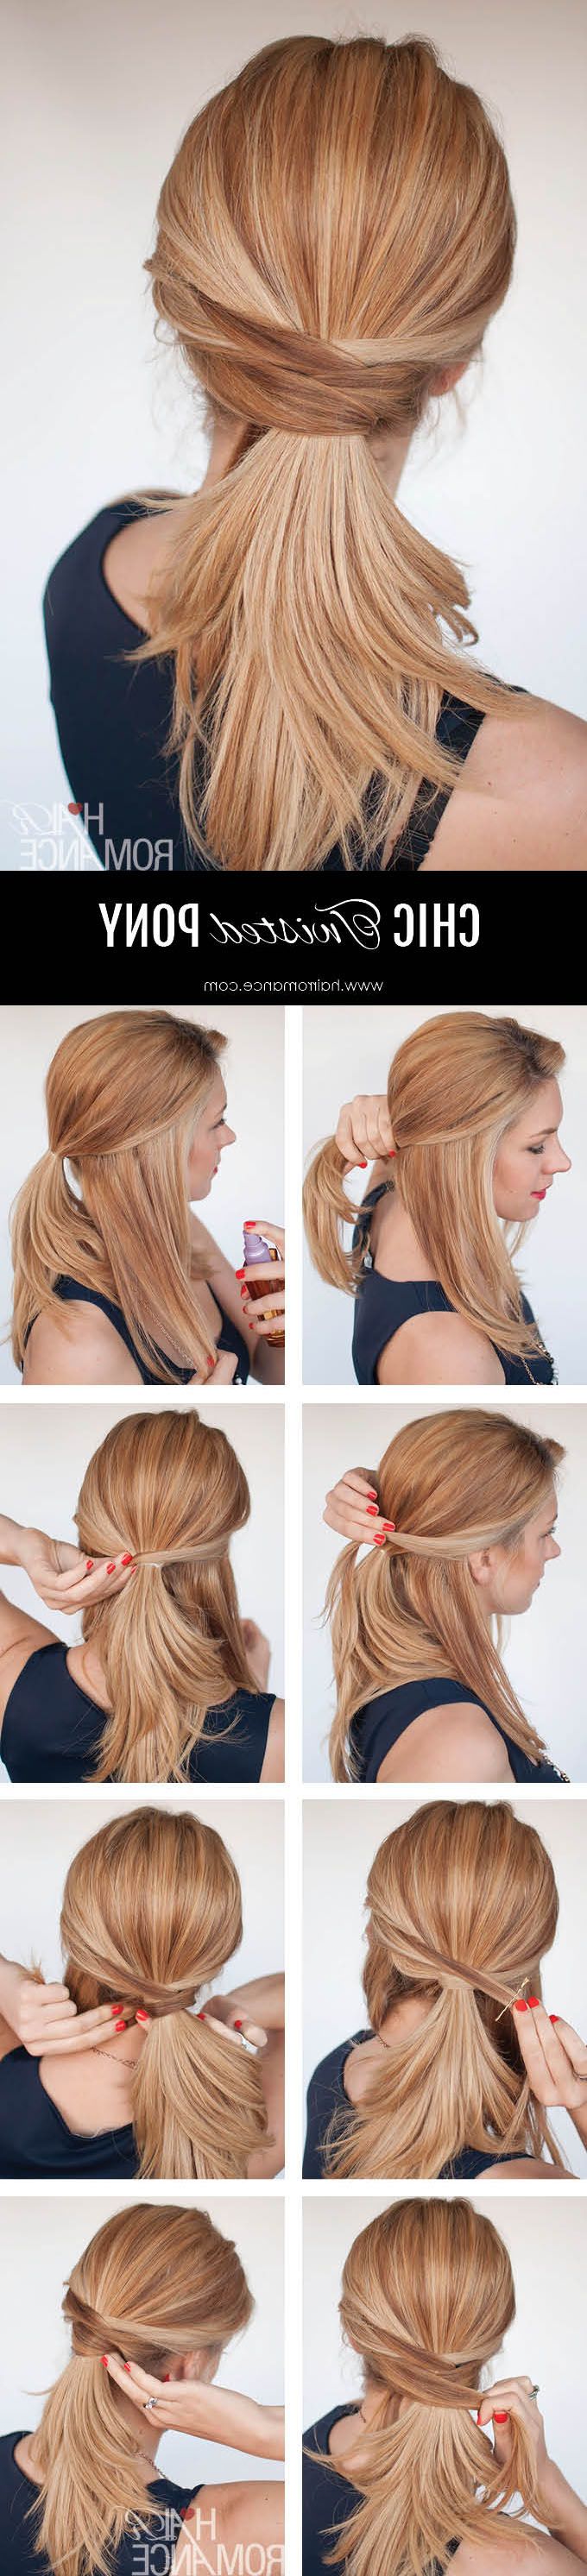 Recent Twist Into Ponytail Hairstyles Inside 3 Chic Ponytail Tutorials To Lift Your Everyday Hair Game – Hair Romance (View 14 of 20)